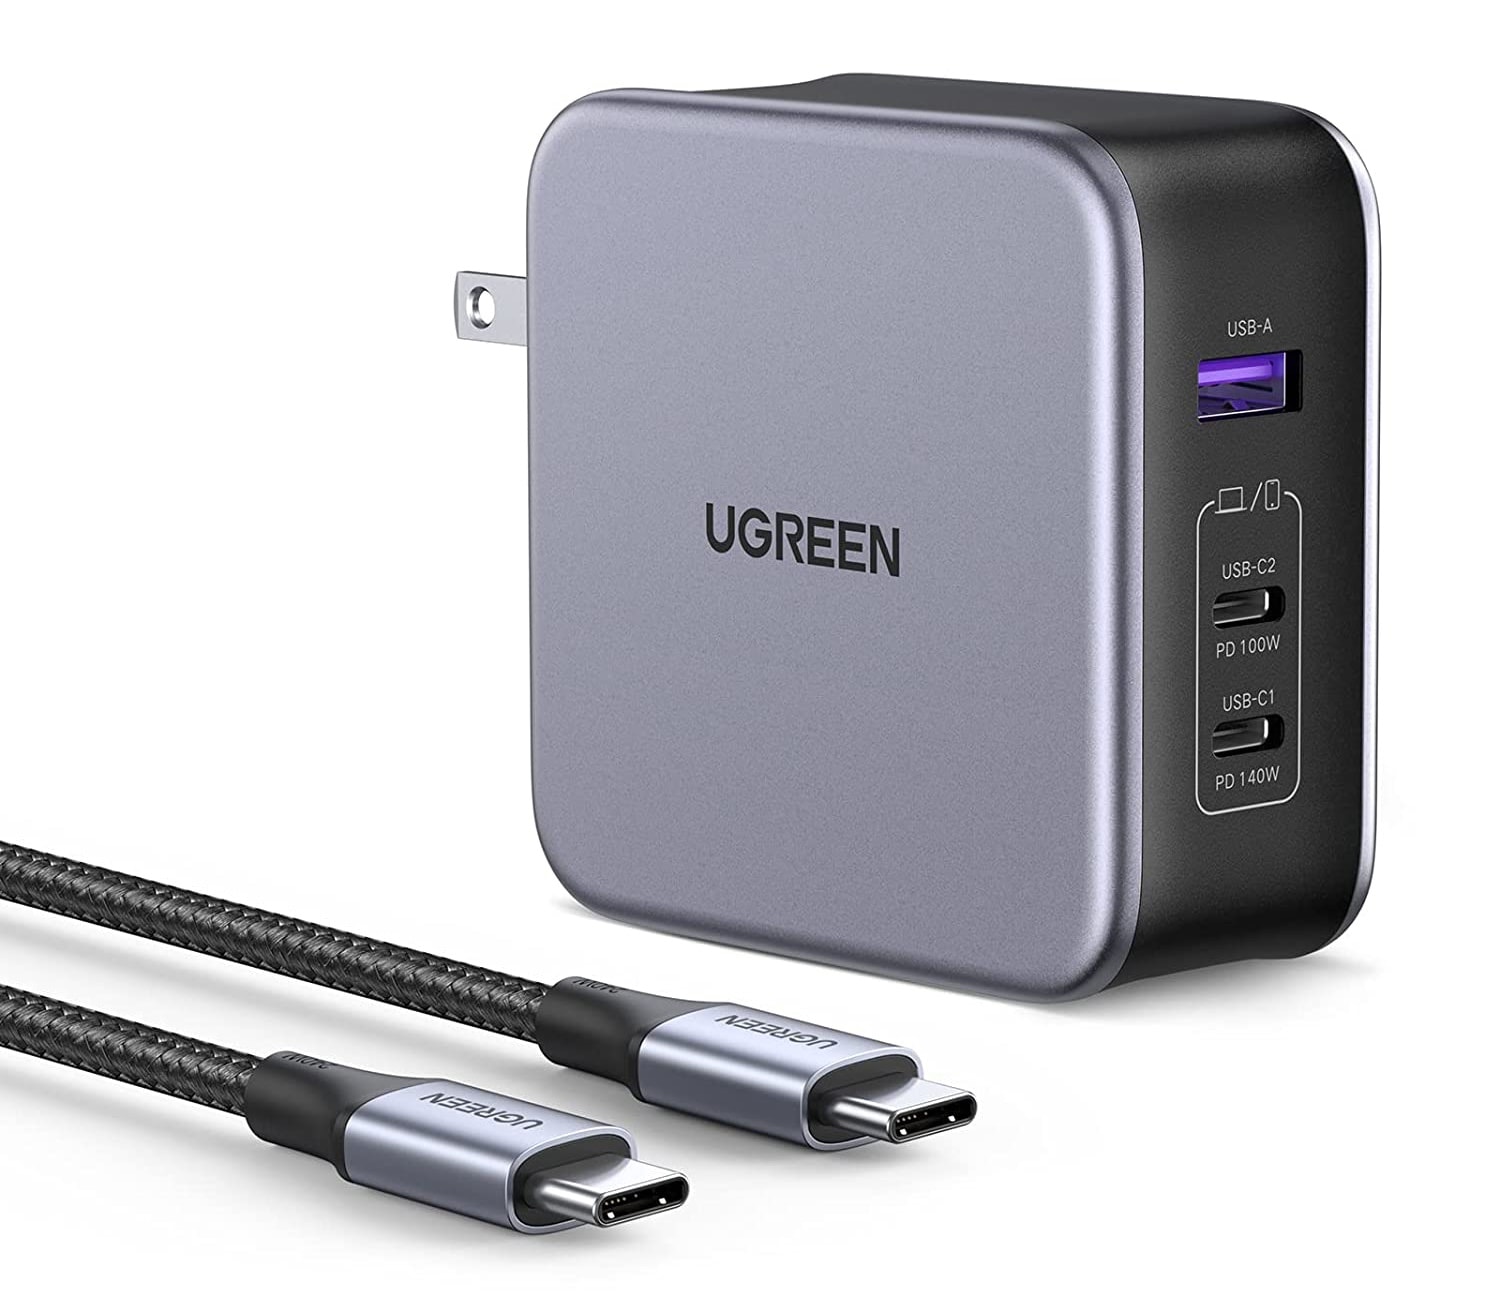 Ugreen's new charger can pump 140W of power to up to three devices.